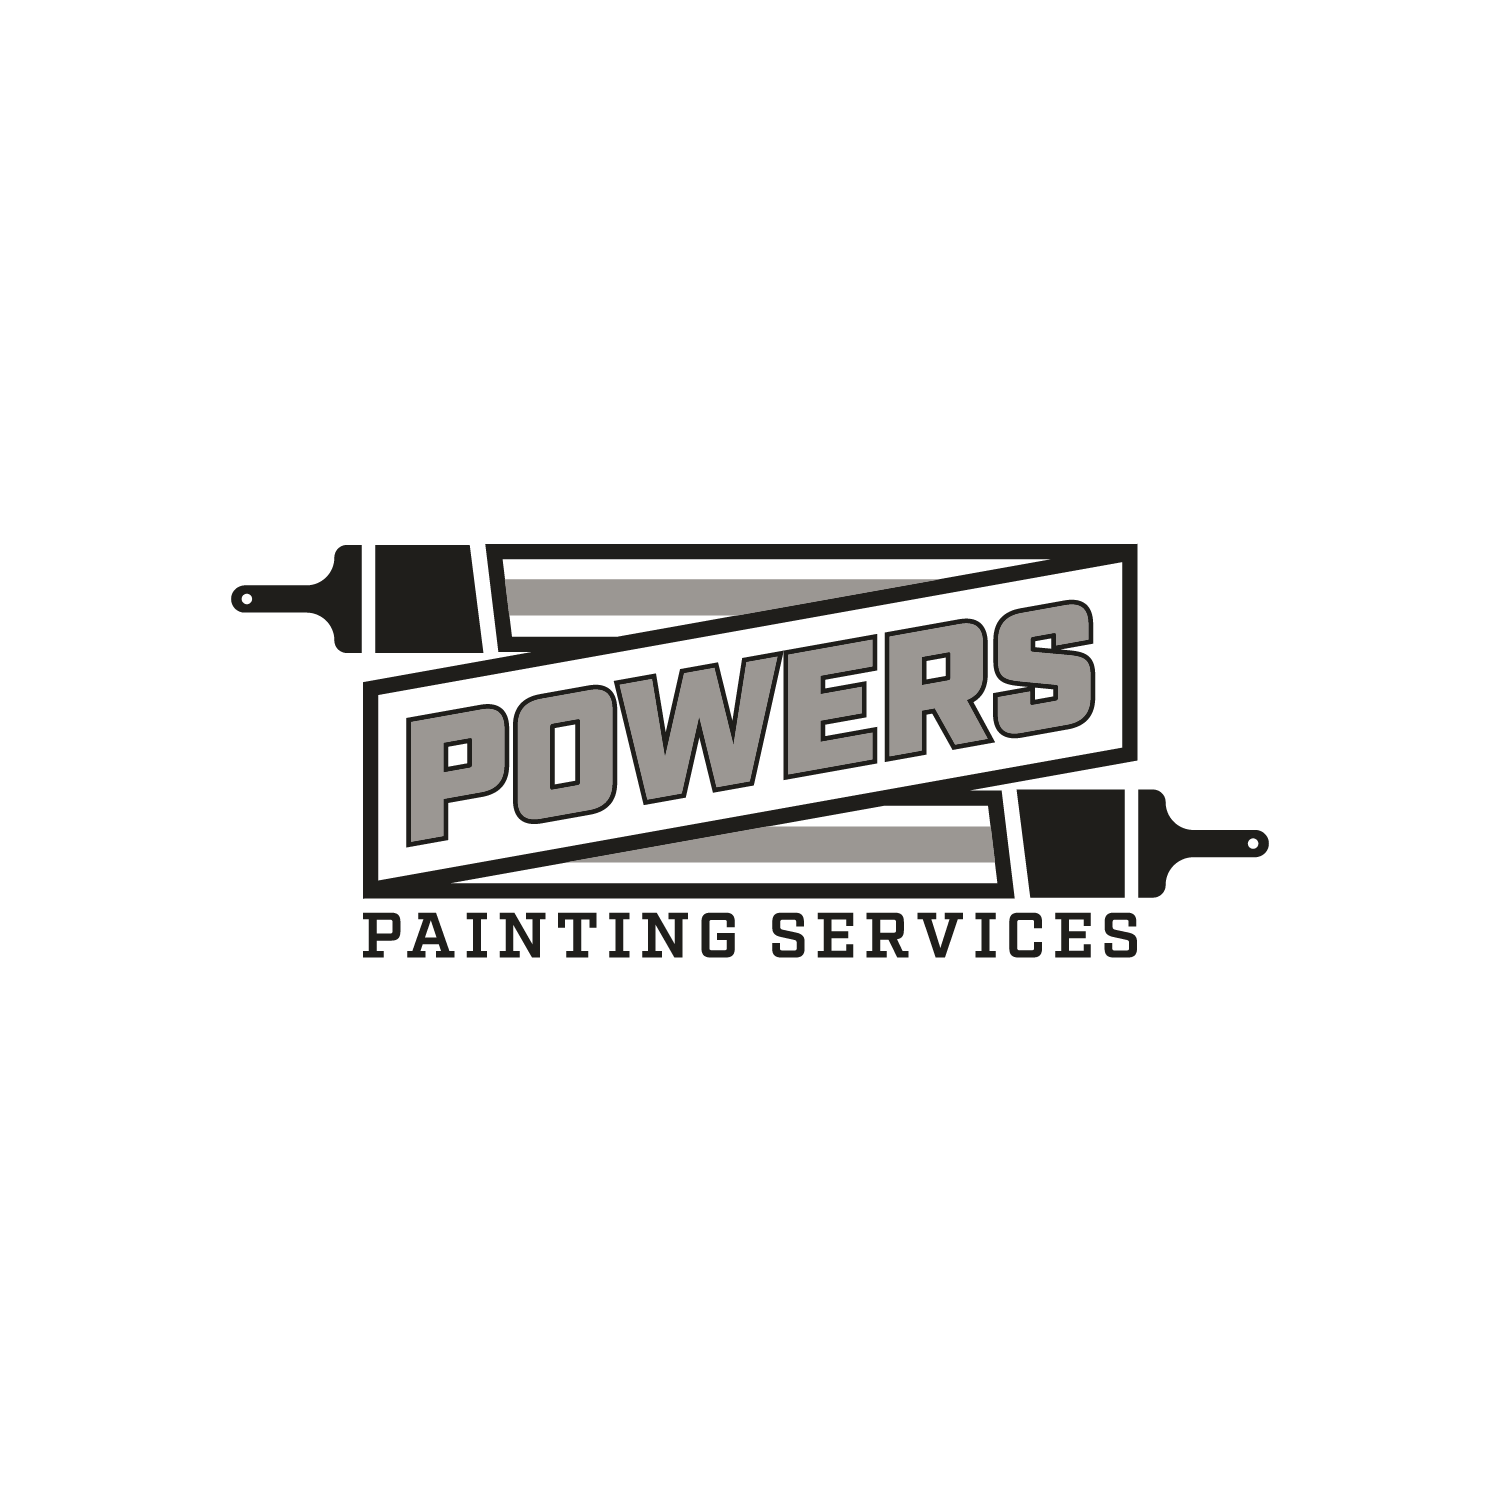 Powers Painting Services LLC